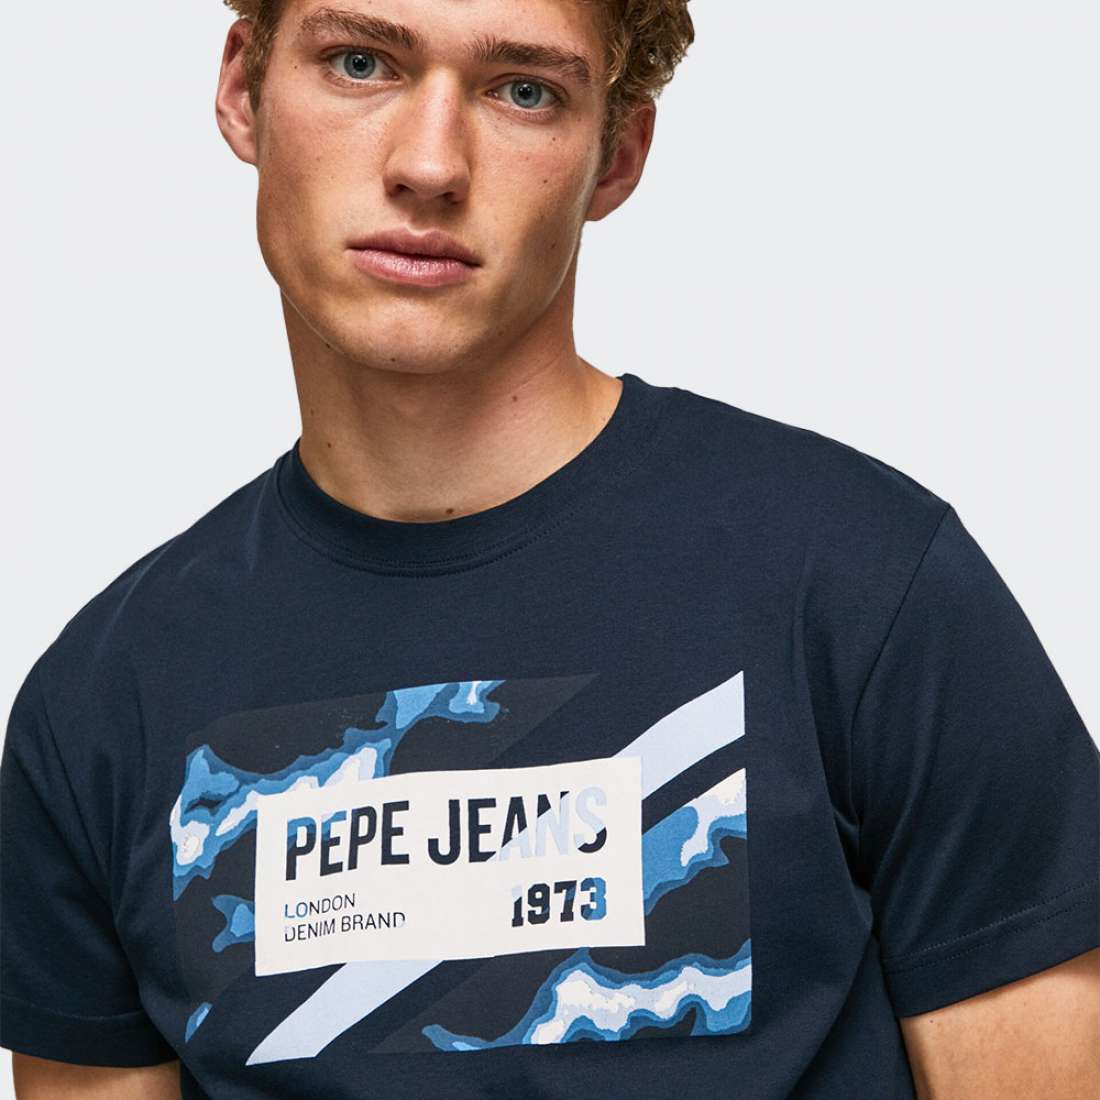 TSHIRT PEPE JEANS REDERICK DULWICH